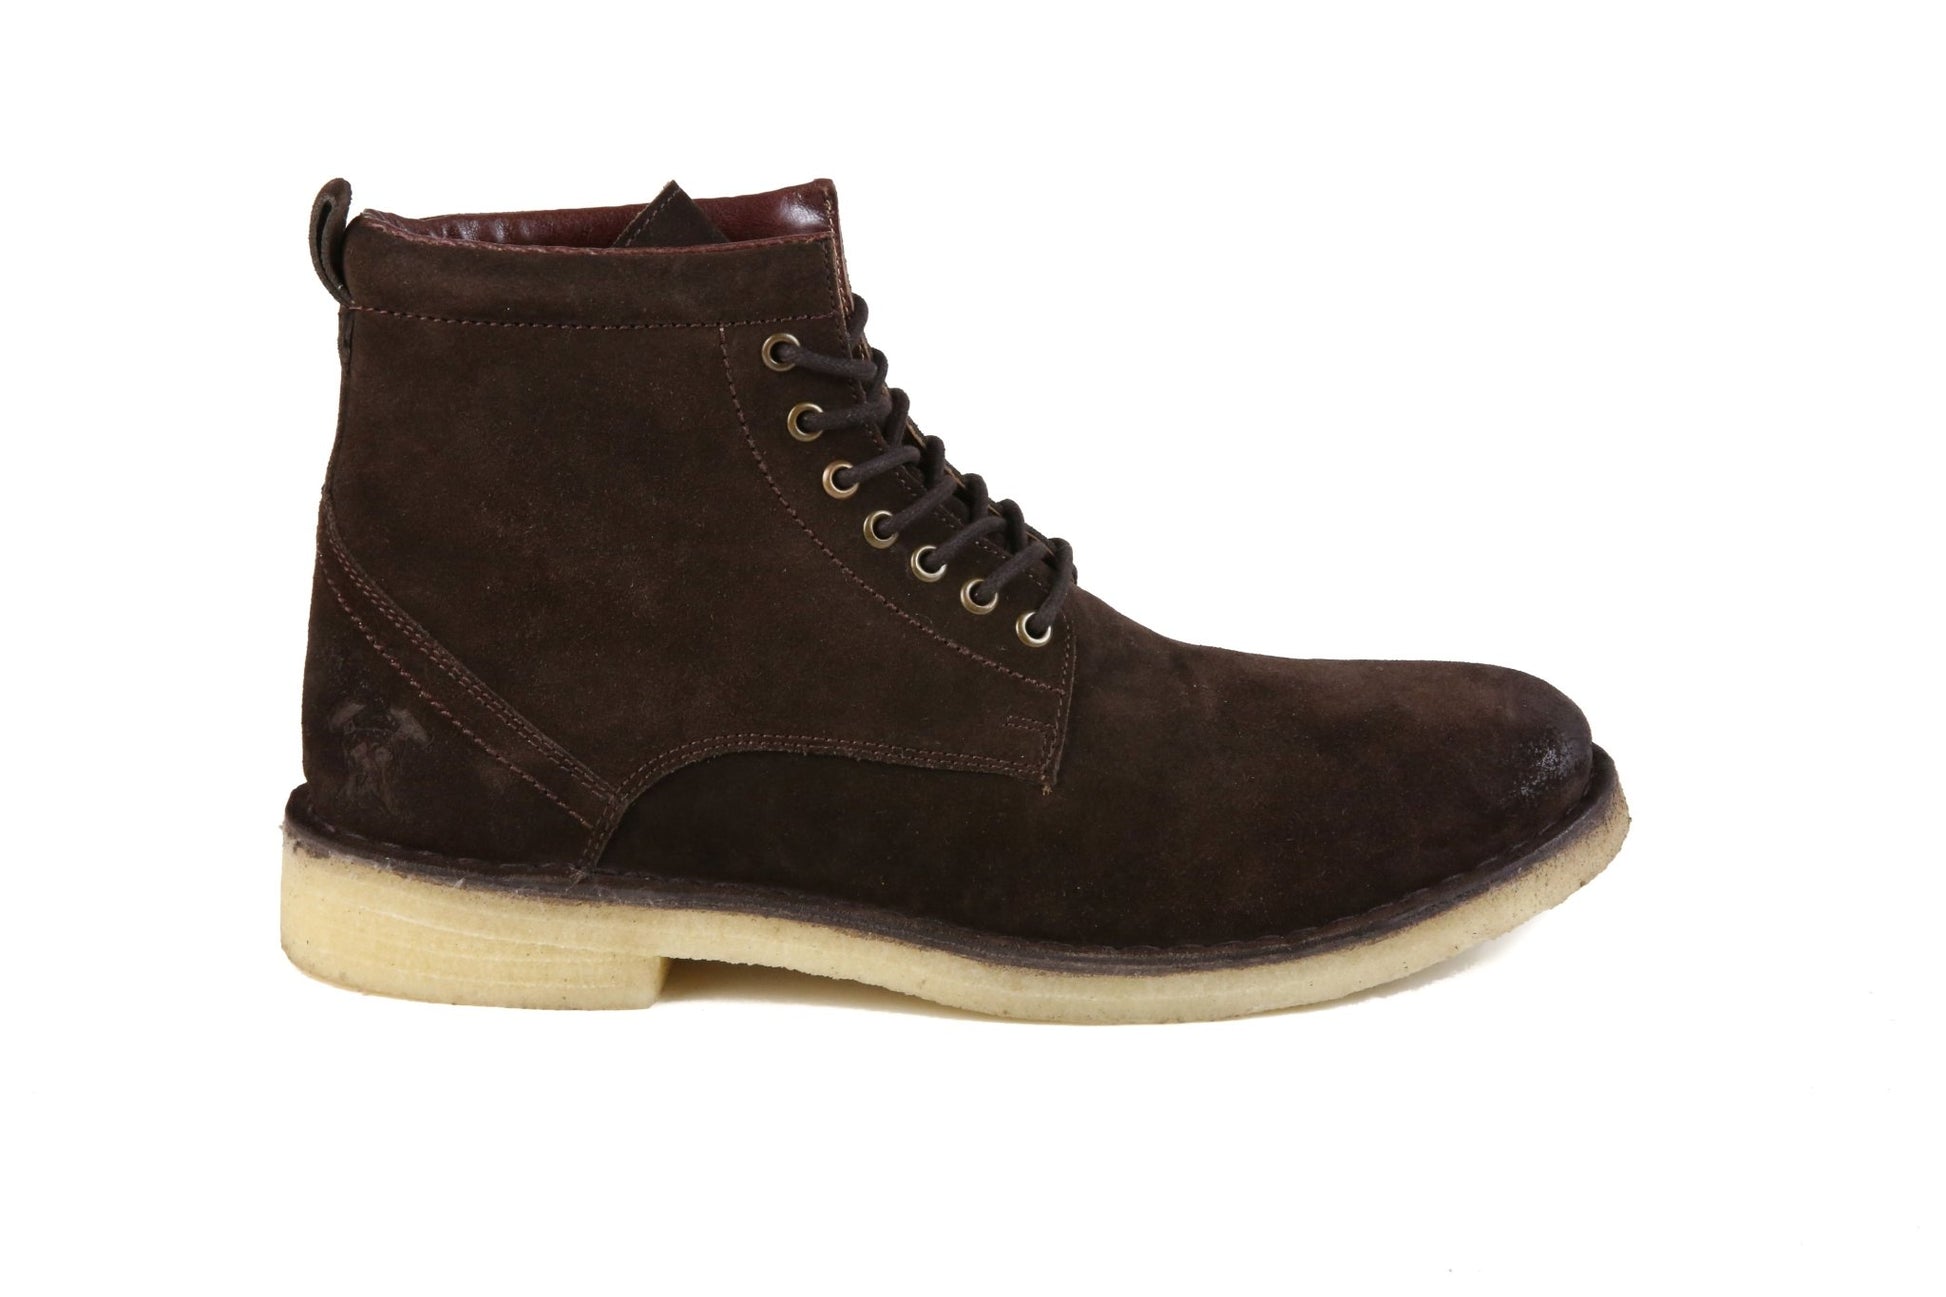 Hound & Hammer The Hunter | Chocolate Ankle Boots for Men - Men - Footwear - Boots - Ankle Boots - Benn~Burry